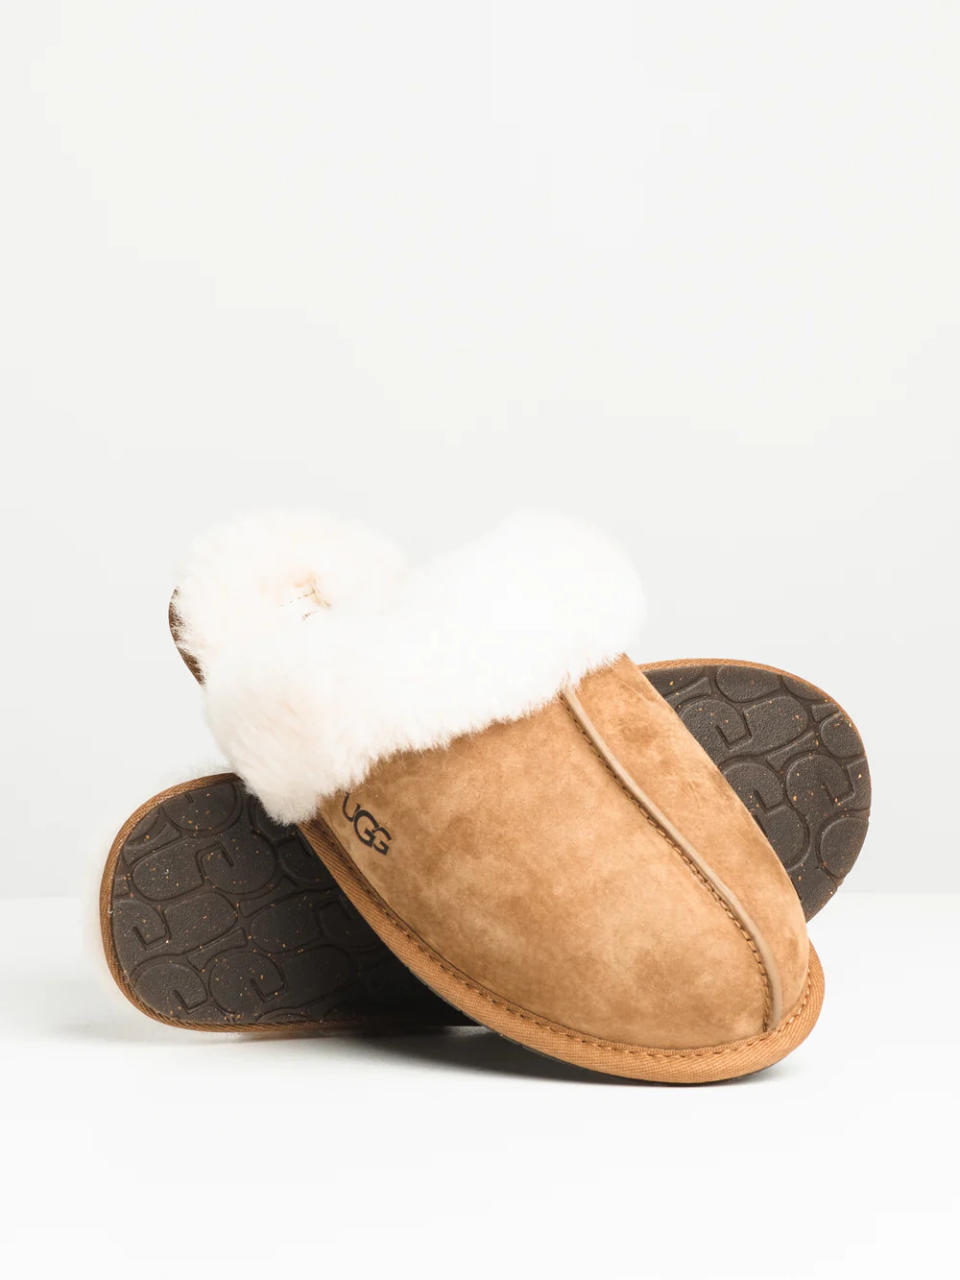 The Scuffette Slippers also come in Ugg's most popular colour, this medium camel brown.